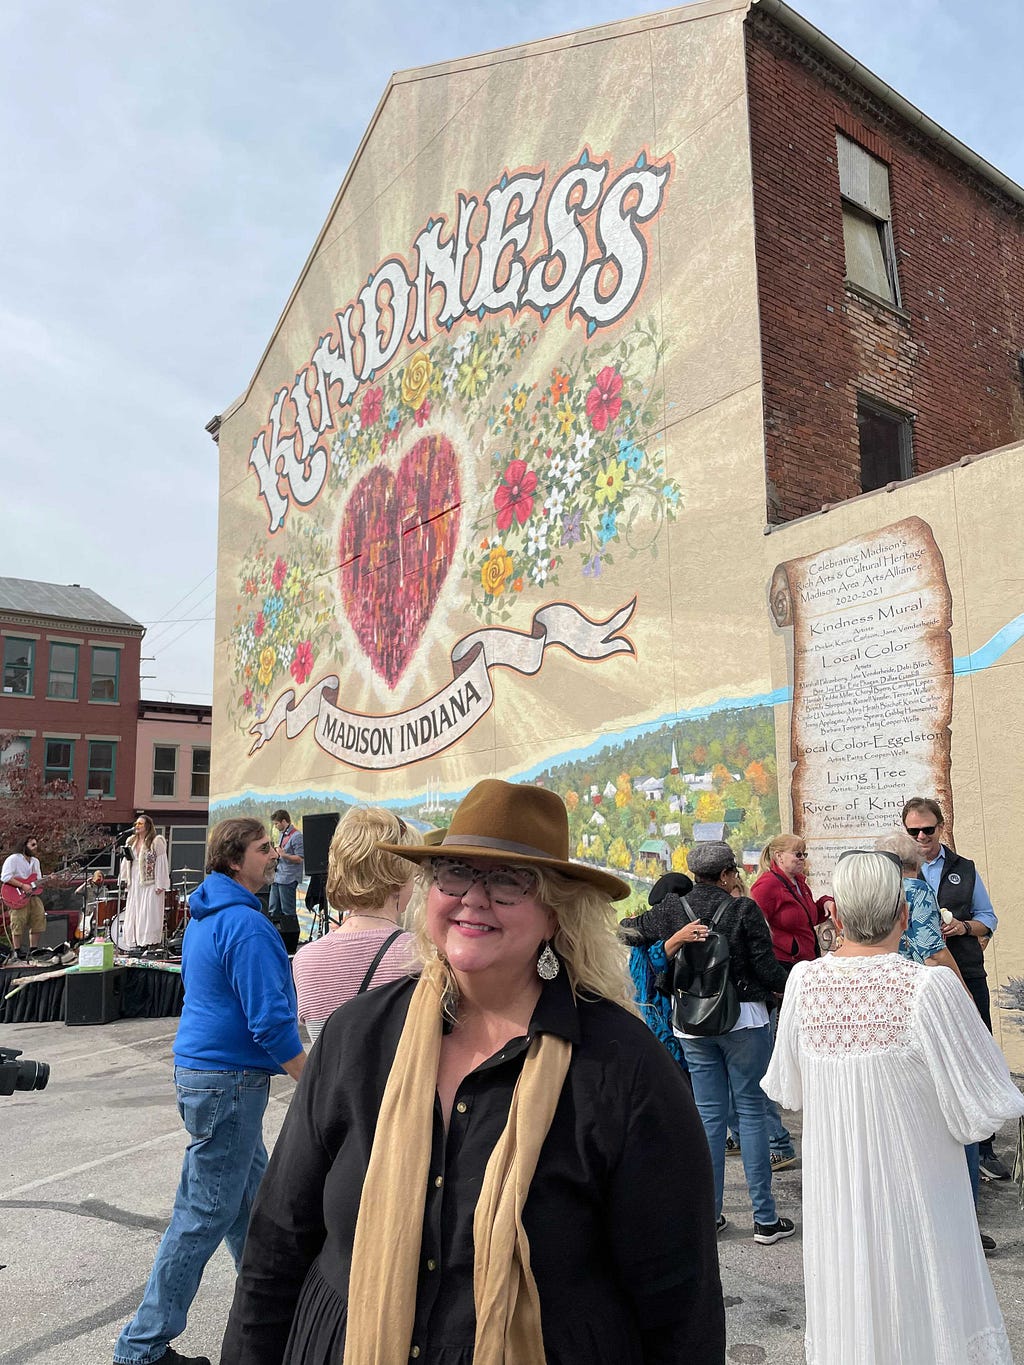 Kim Franklin Nyberg stands in front of a larger mural stating “Kindness — Madison, Indiana” surrounded by flowers and a large heart in the center.